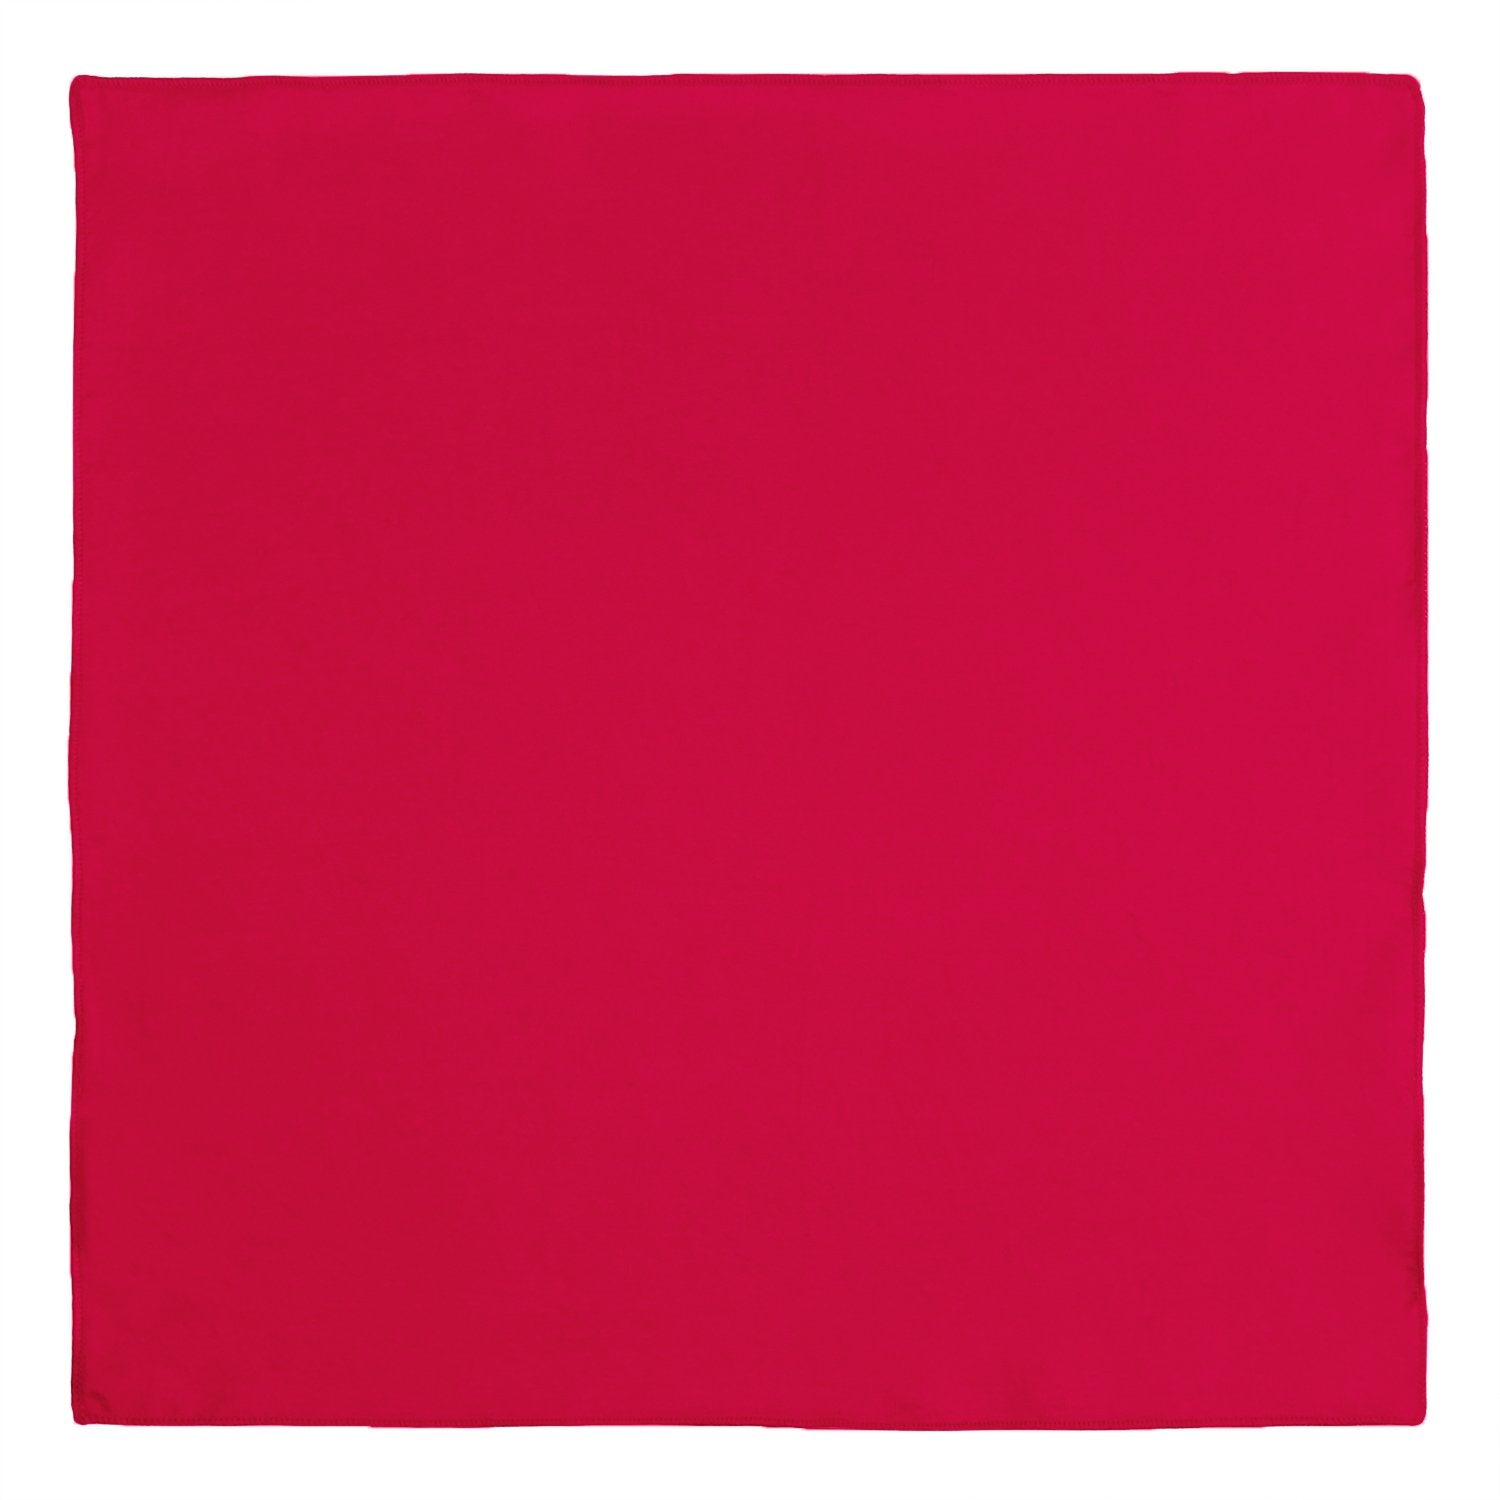 Chokore Teaberry Pure Silk Pocket Square, from the Solids Line